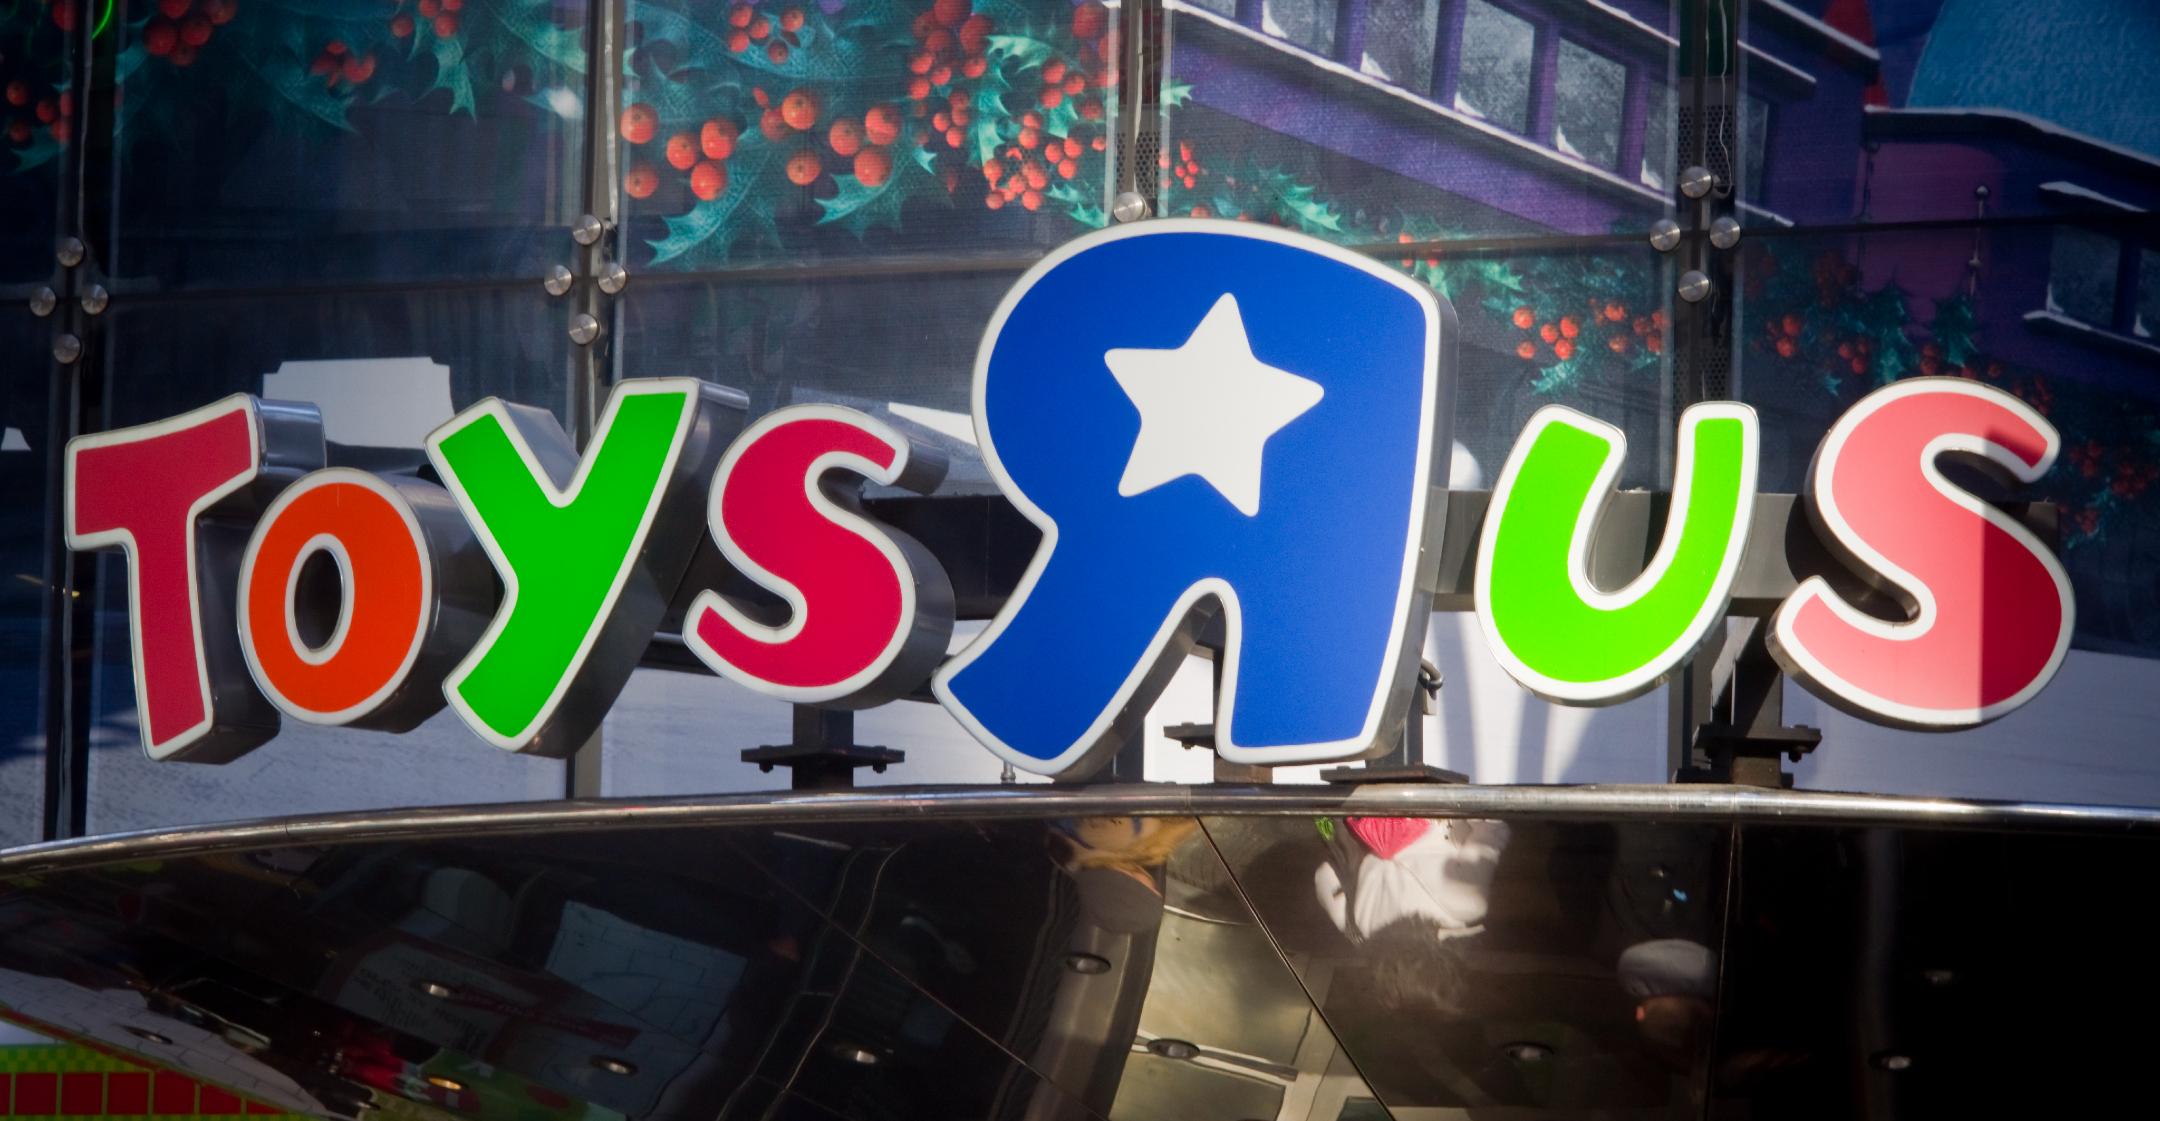 Toys R Us Opening American Dream Mall Store Before Christmas